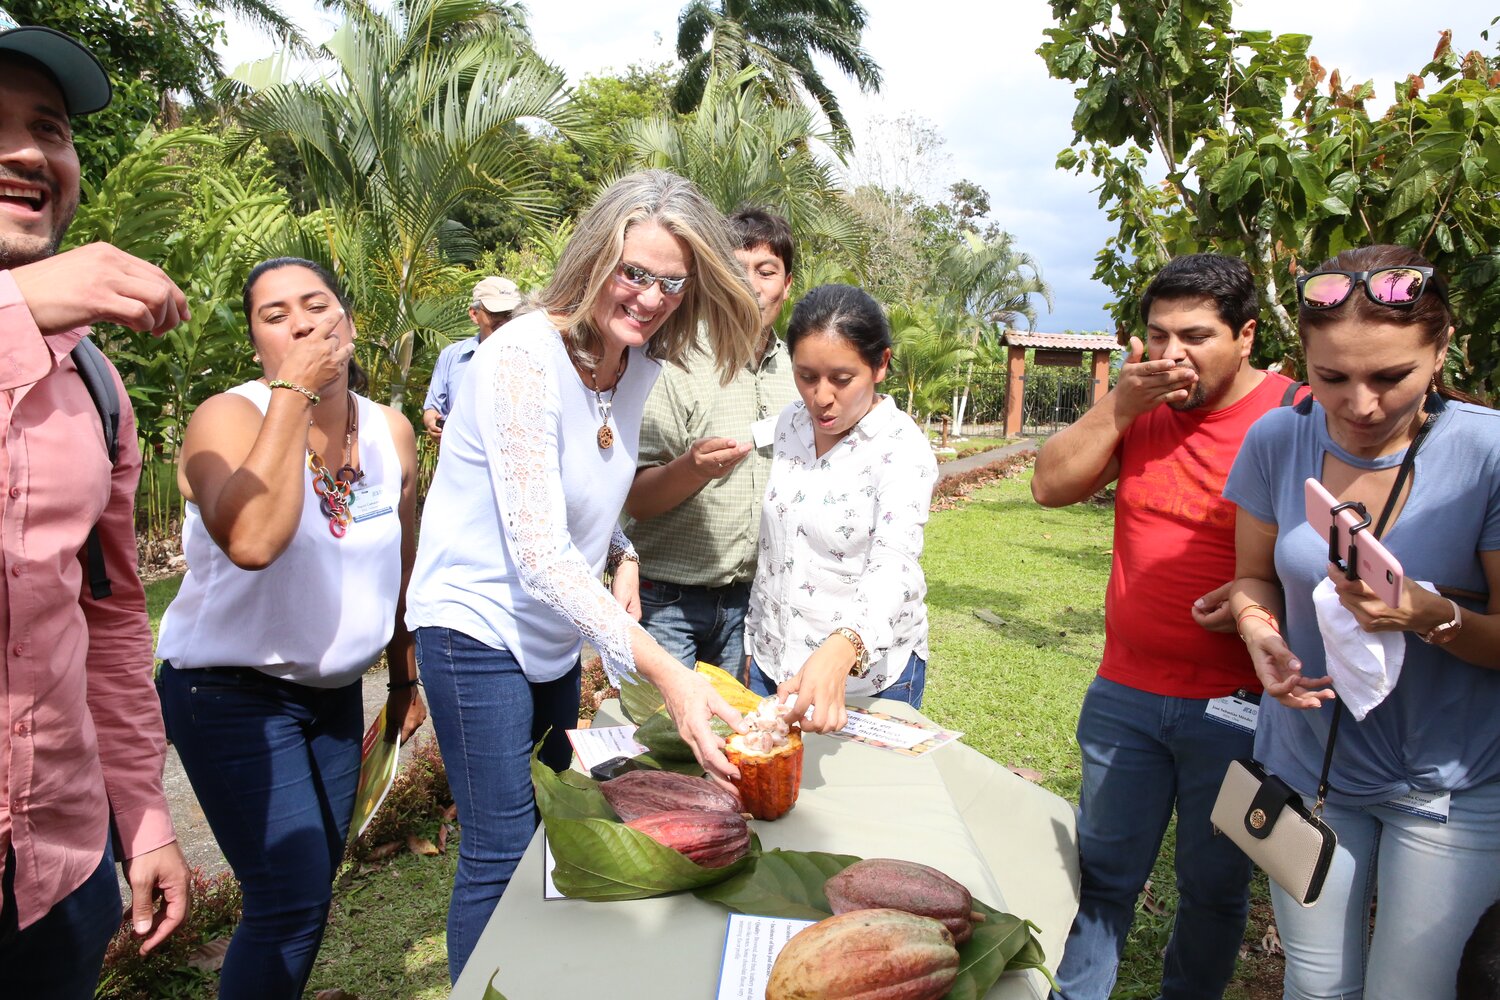 After visiting CATIE’s cacao collection, GOAL workshop participants enjoy a cacao fruit tasting moment under the sun.